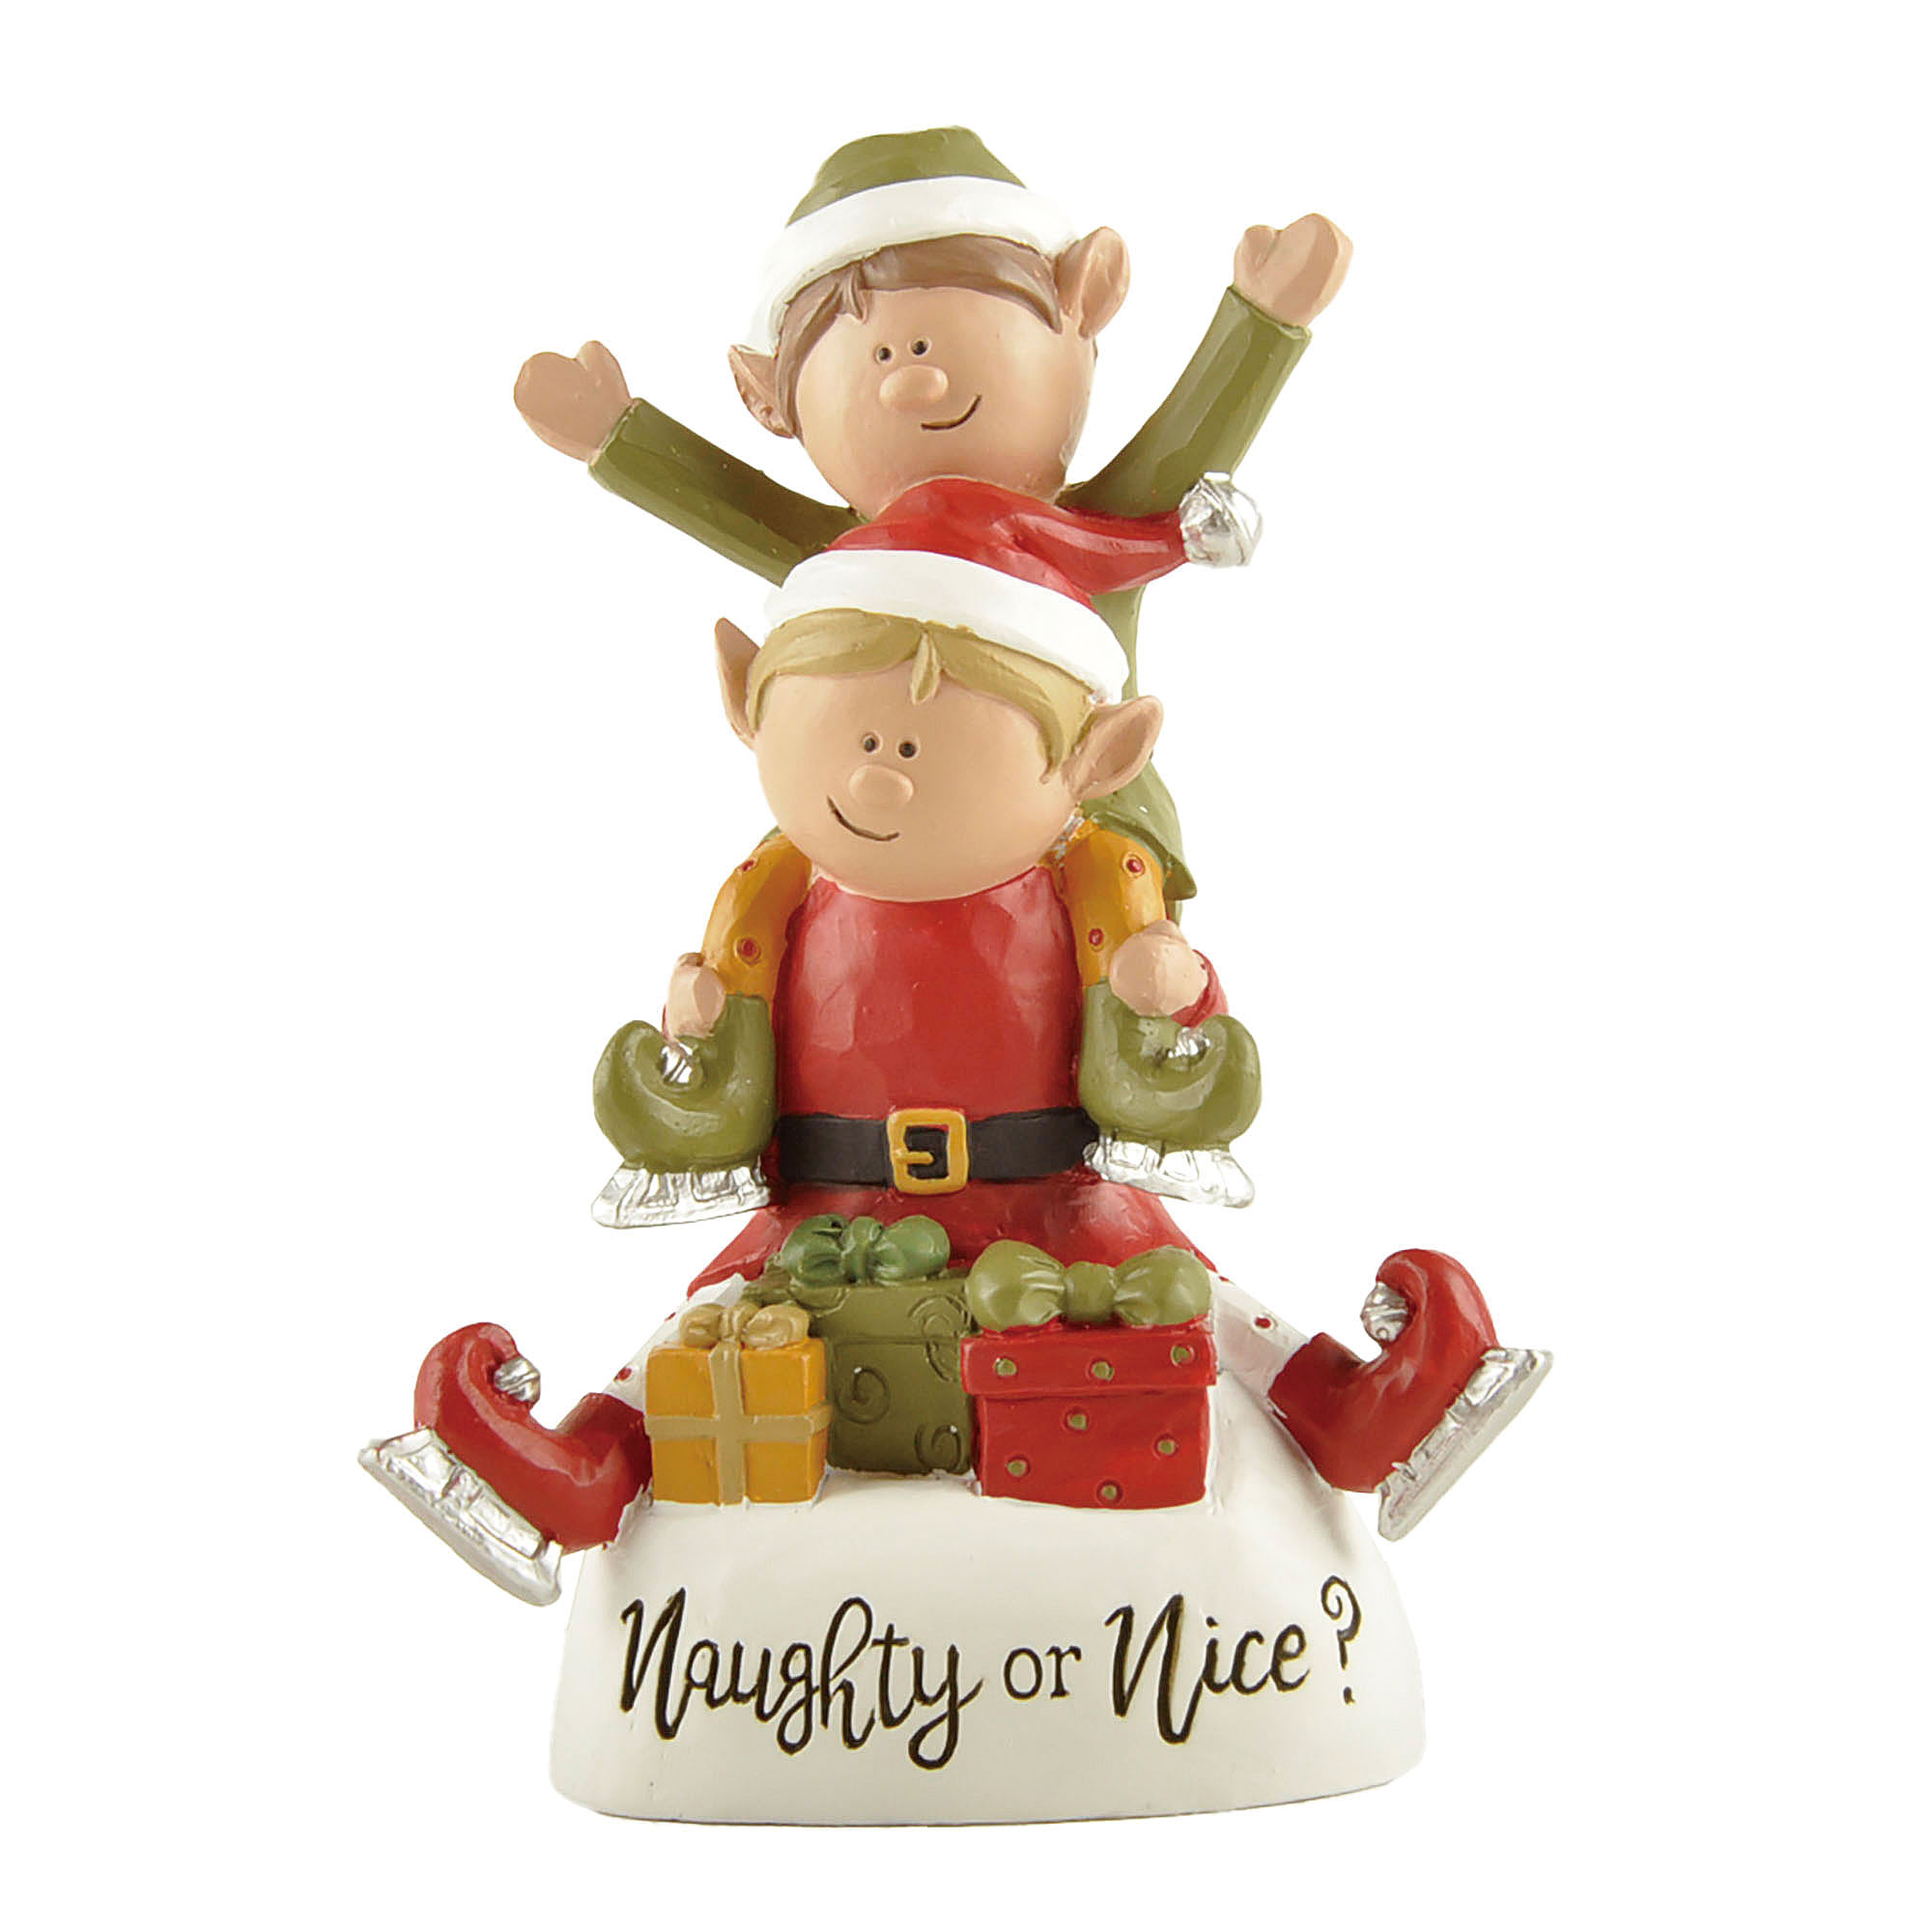 Whimsical Resin Elf Figurine with 'Naughty or Nice?' Sign – Delightful Christmas Decoration for Festive Home Decor 238-13906